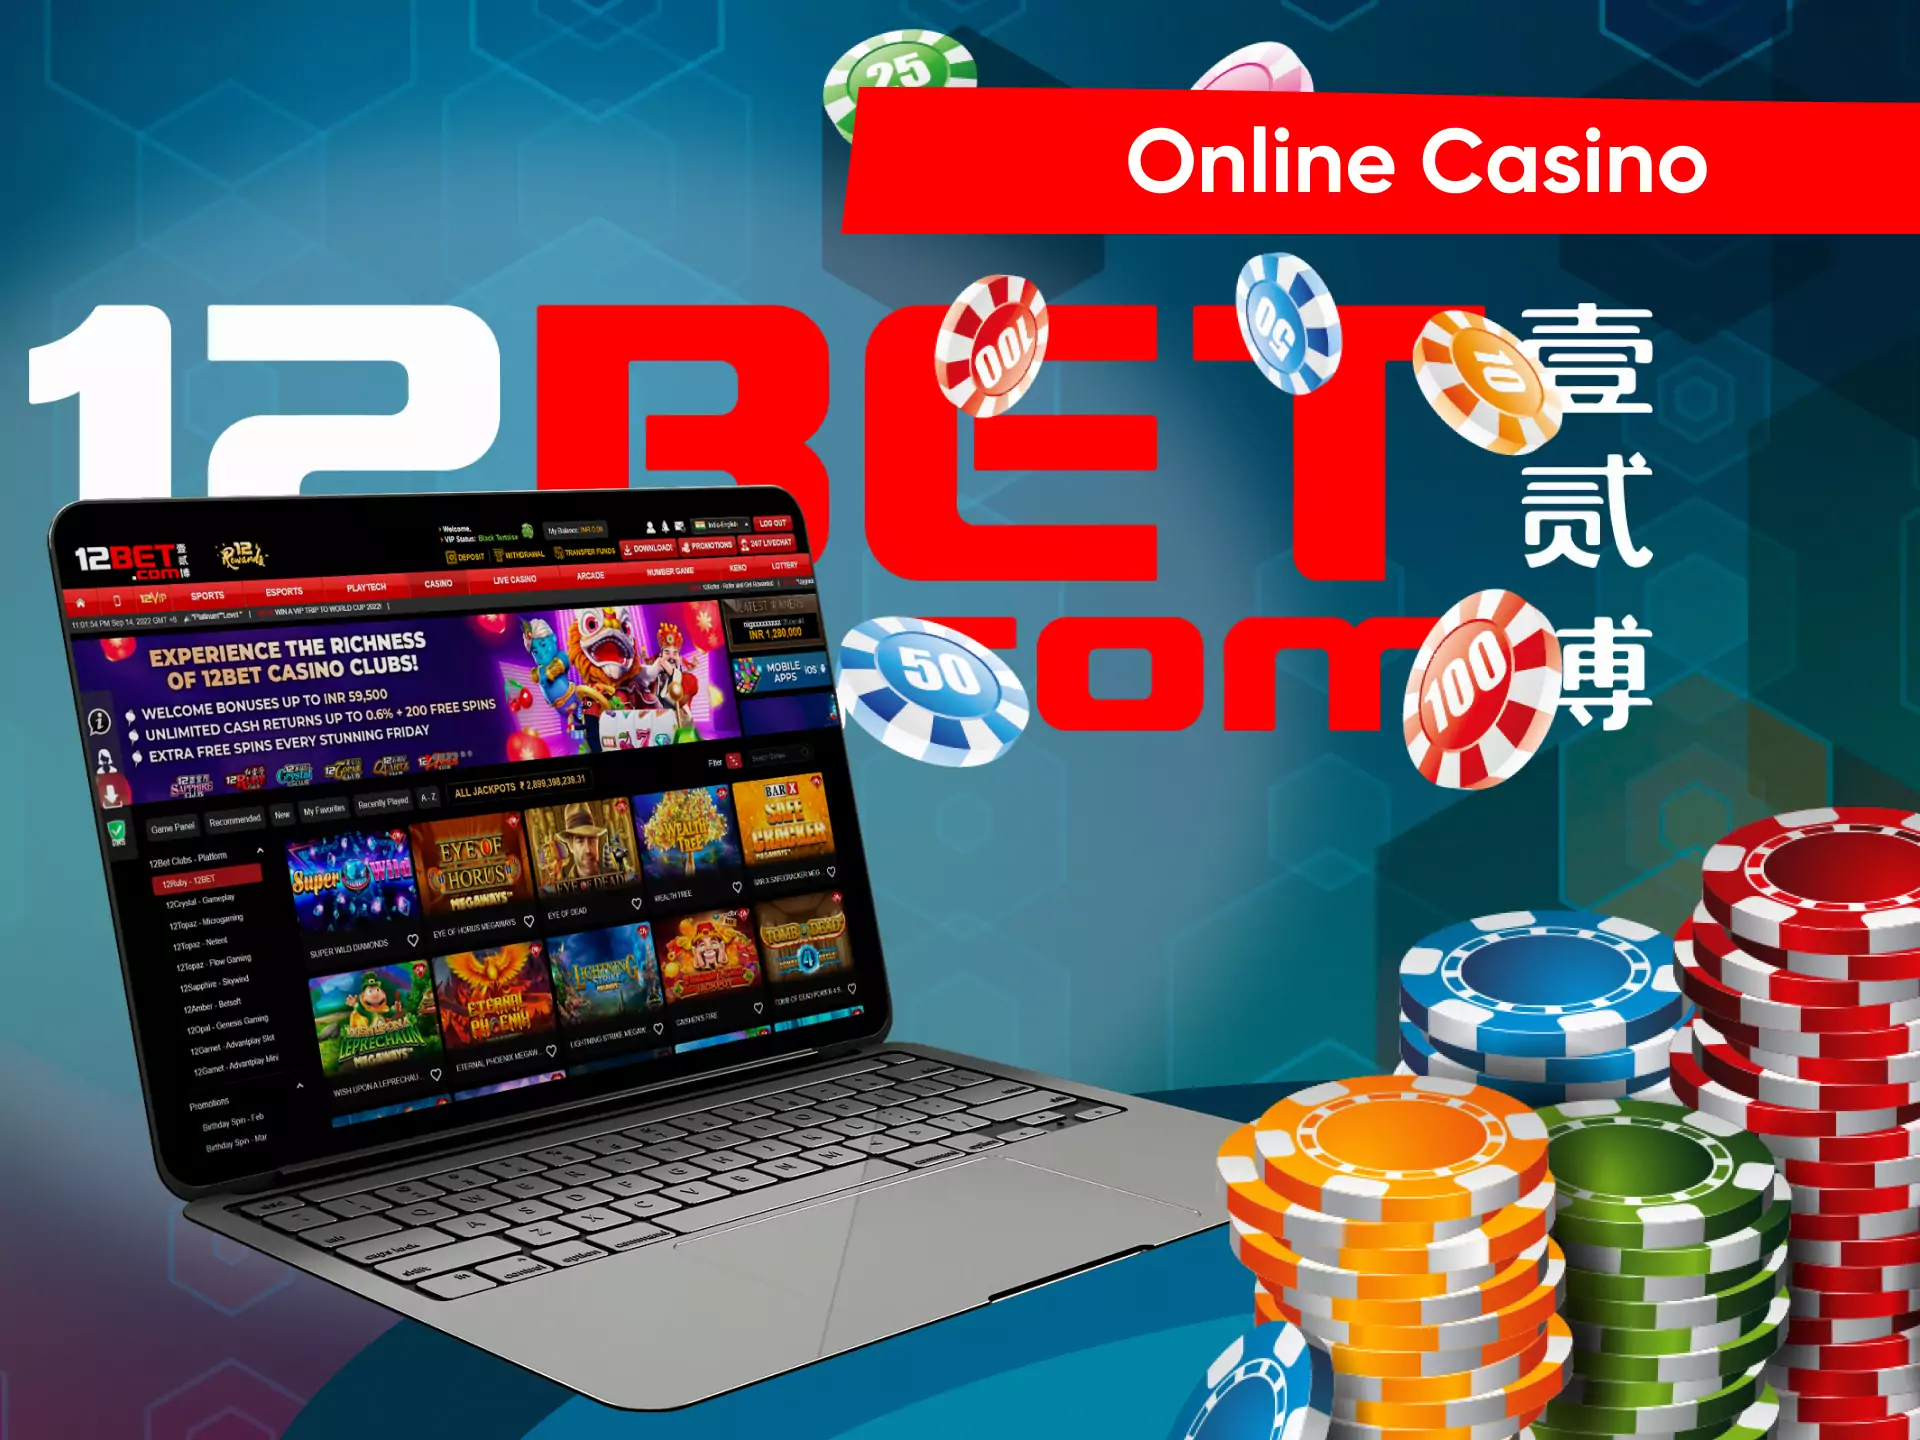 The casino section is quite popular among users of 12bet.